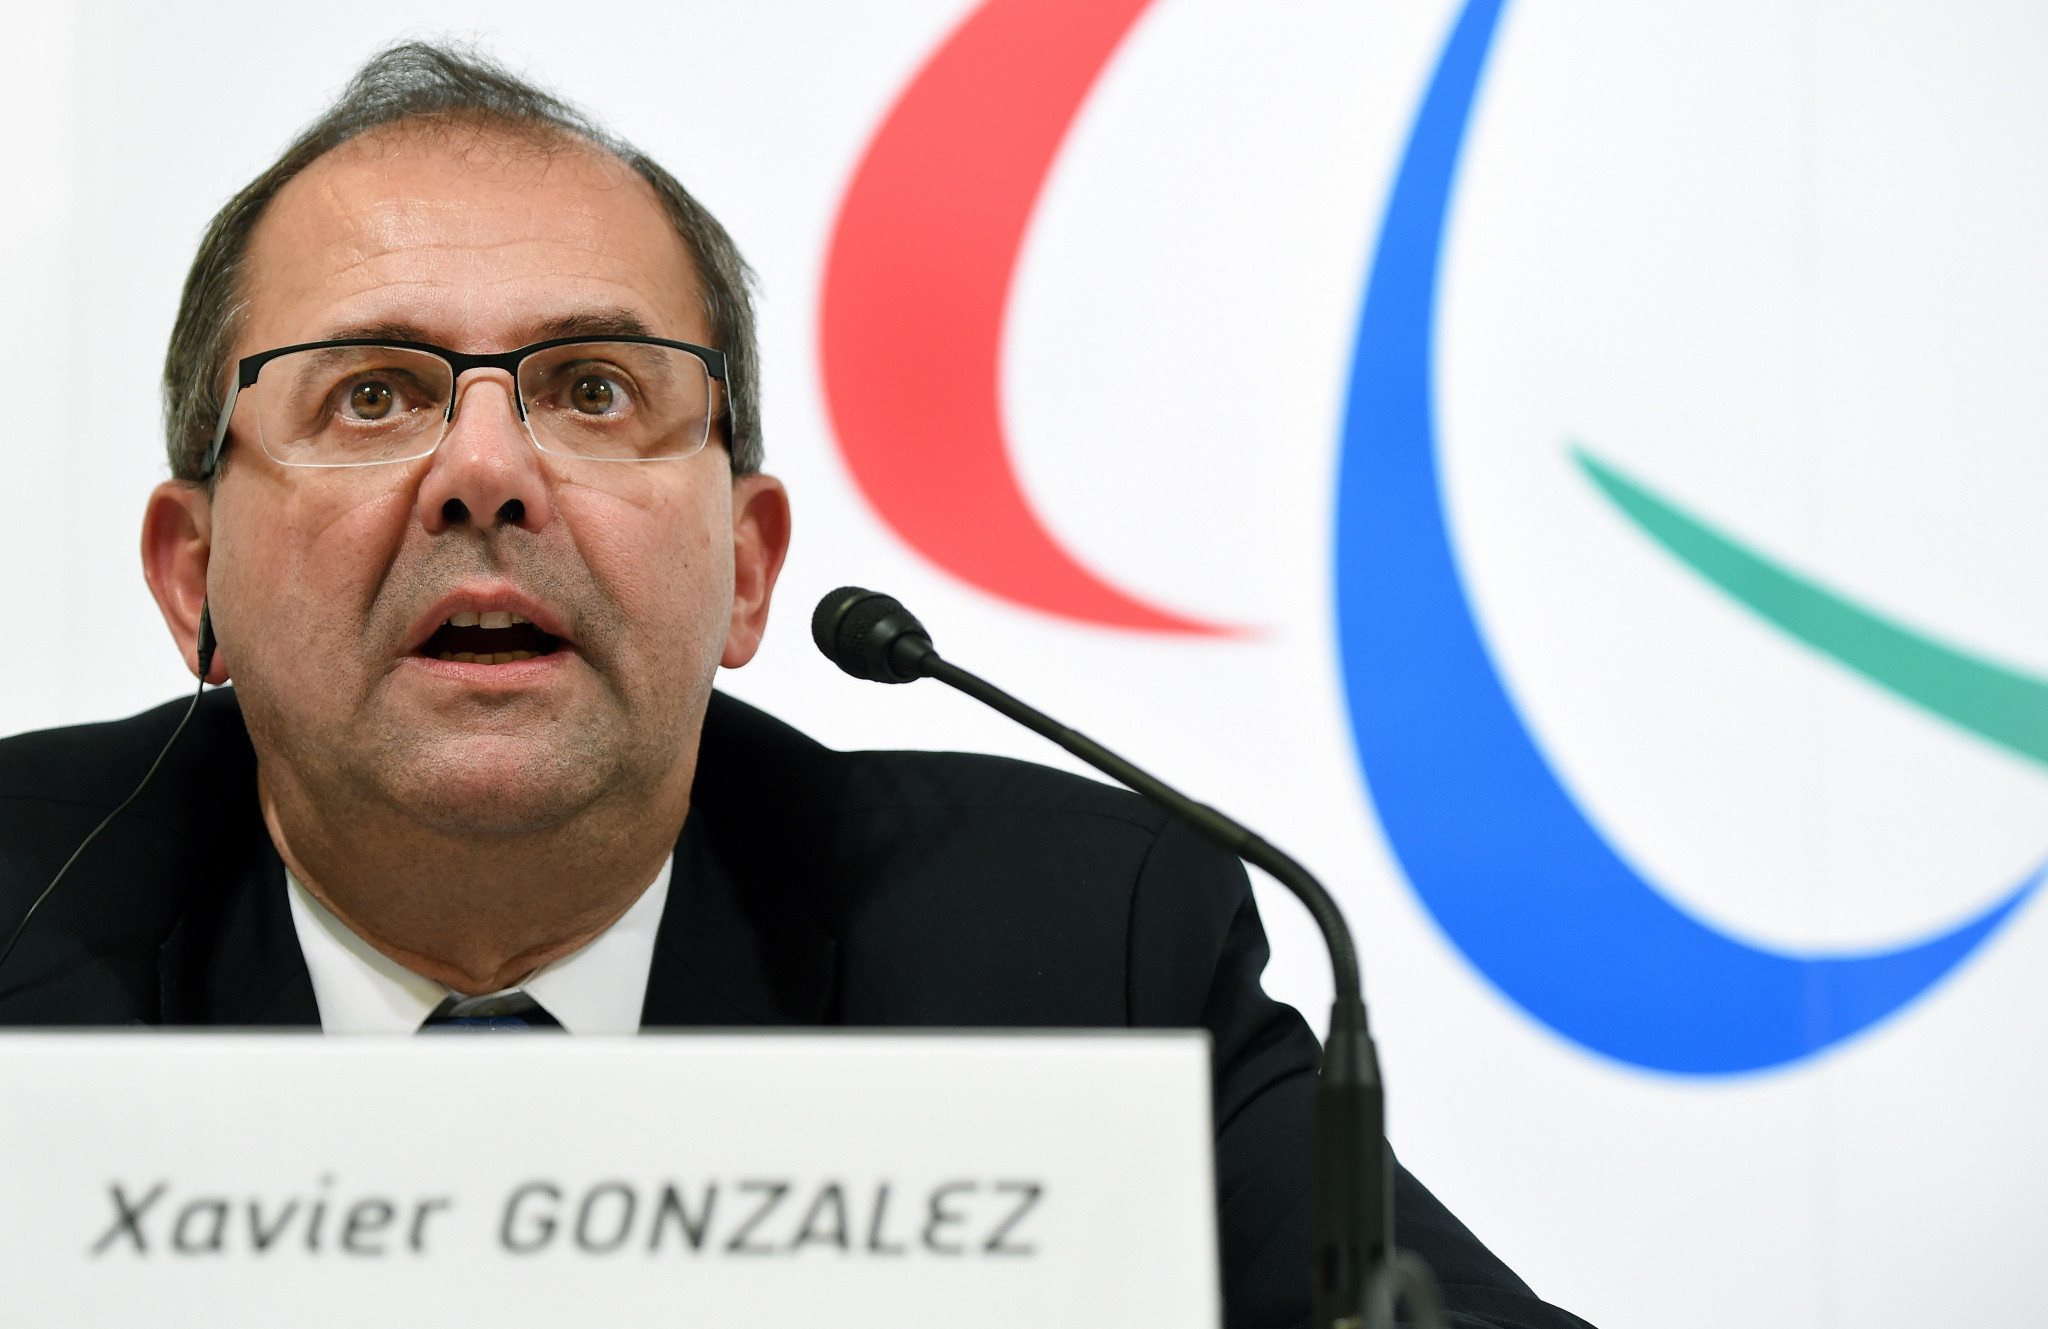 Xavier Gonzalez has left his role as chief executive of the International Paralympic Committee ©IPC